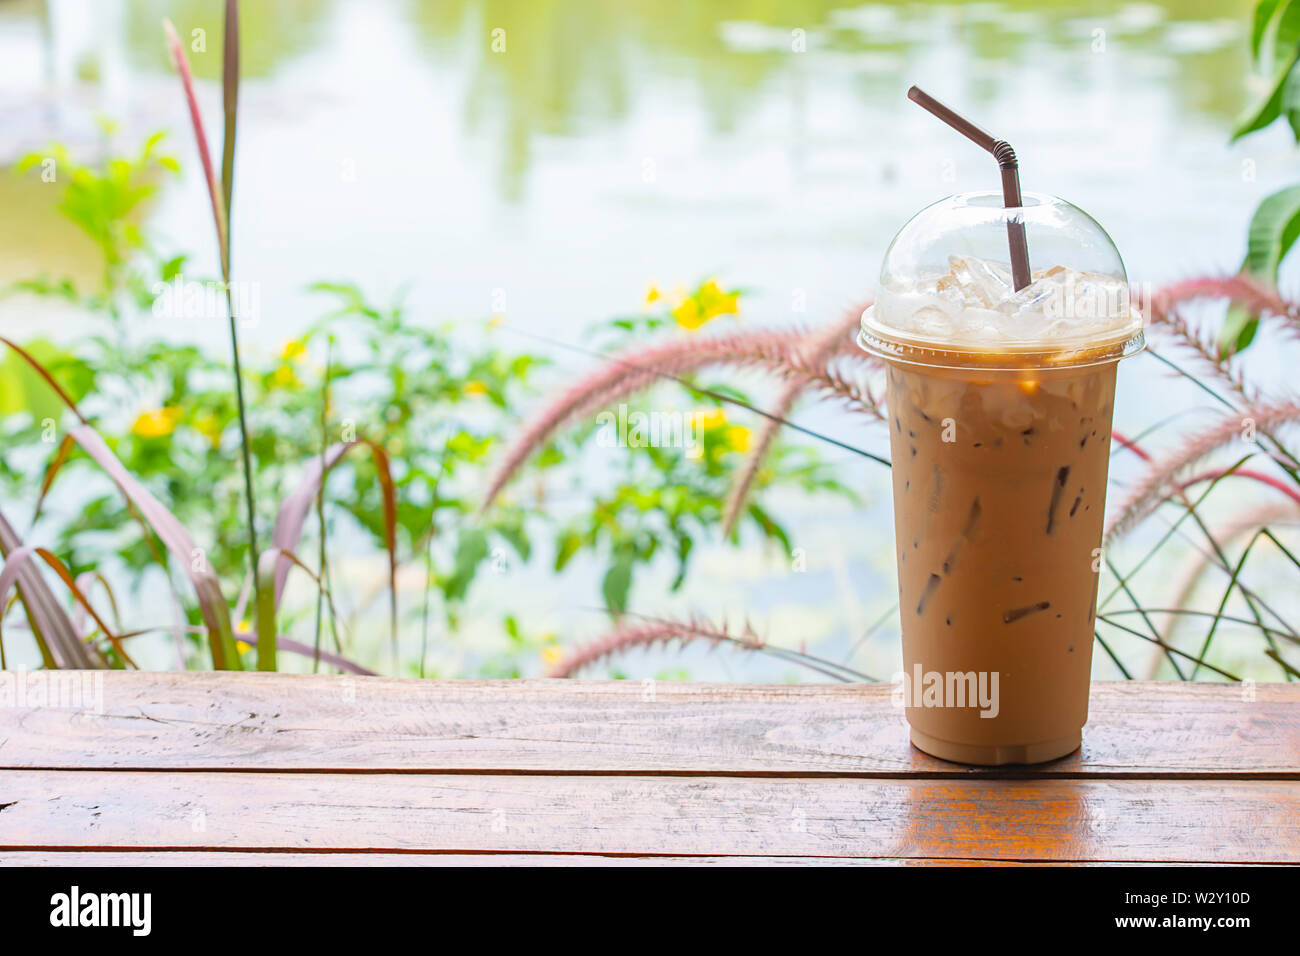 https://c8.alamy.com/comp/W2Y10D/iced-coffee-in-glass-on-the-table-background-pennisetum-pedicellatum-and-pond-W2Y10D.jpg